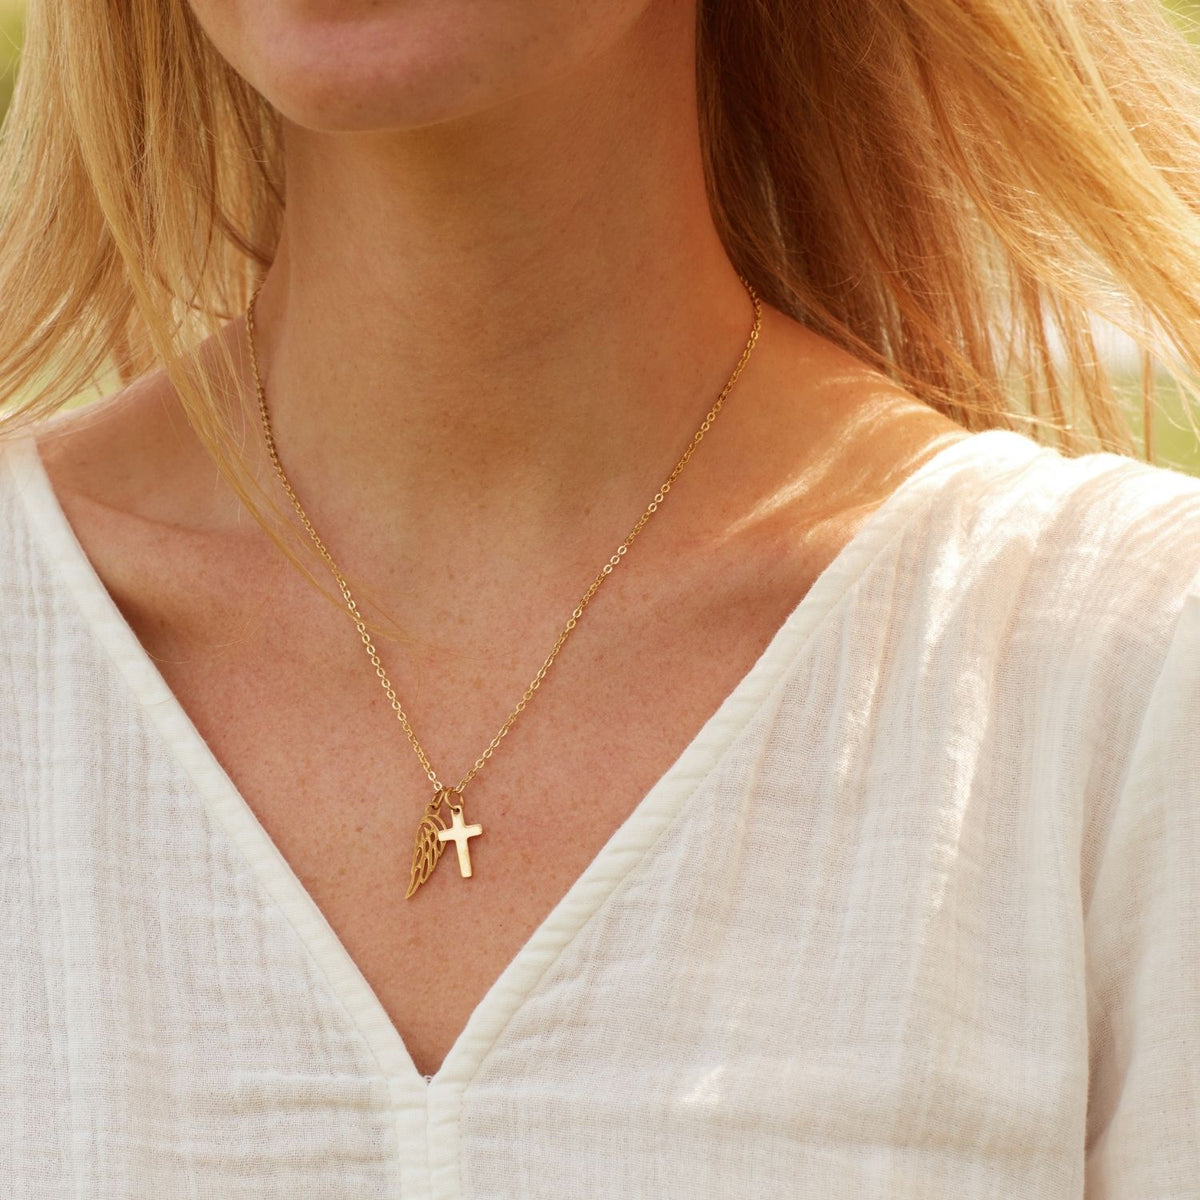 To My Gorgeous Fiancé | God&#39;s Power in Your Life | Cross Necklace